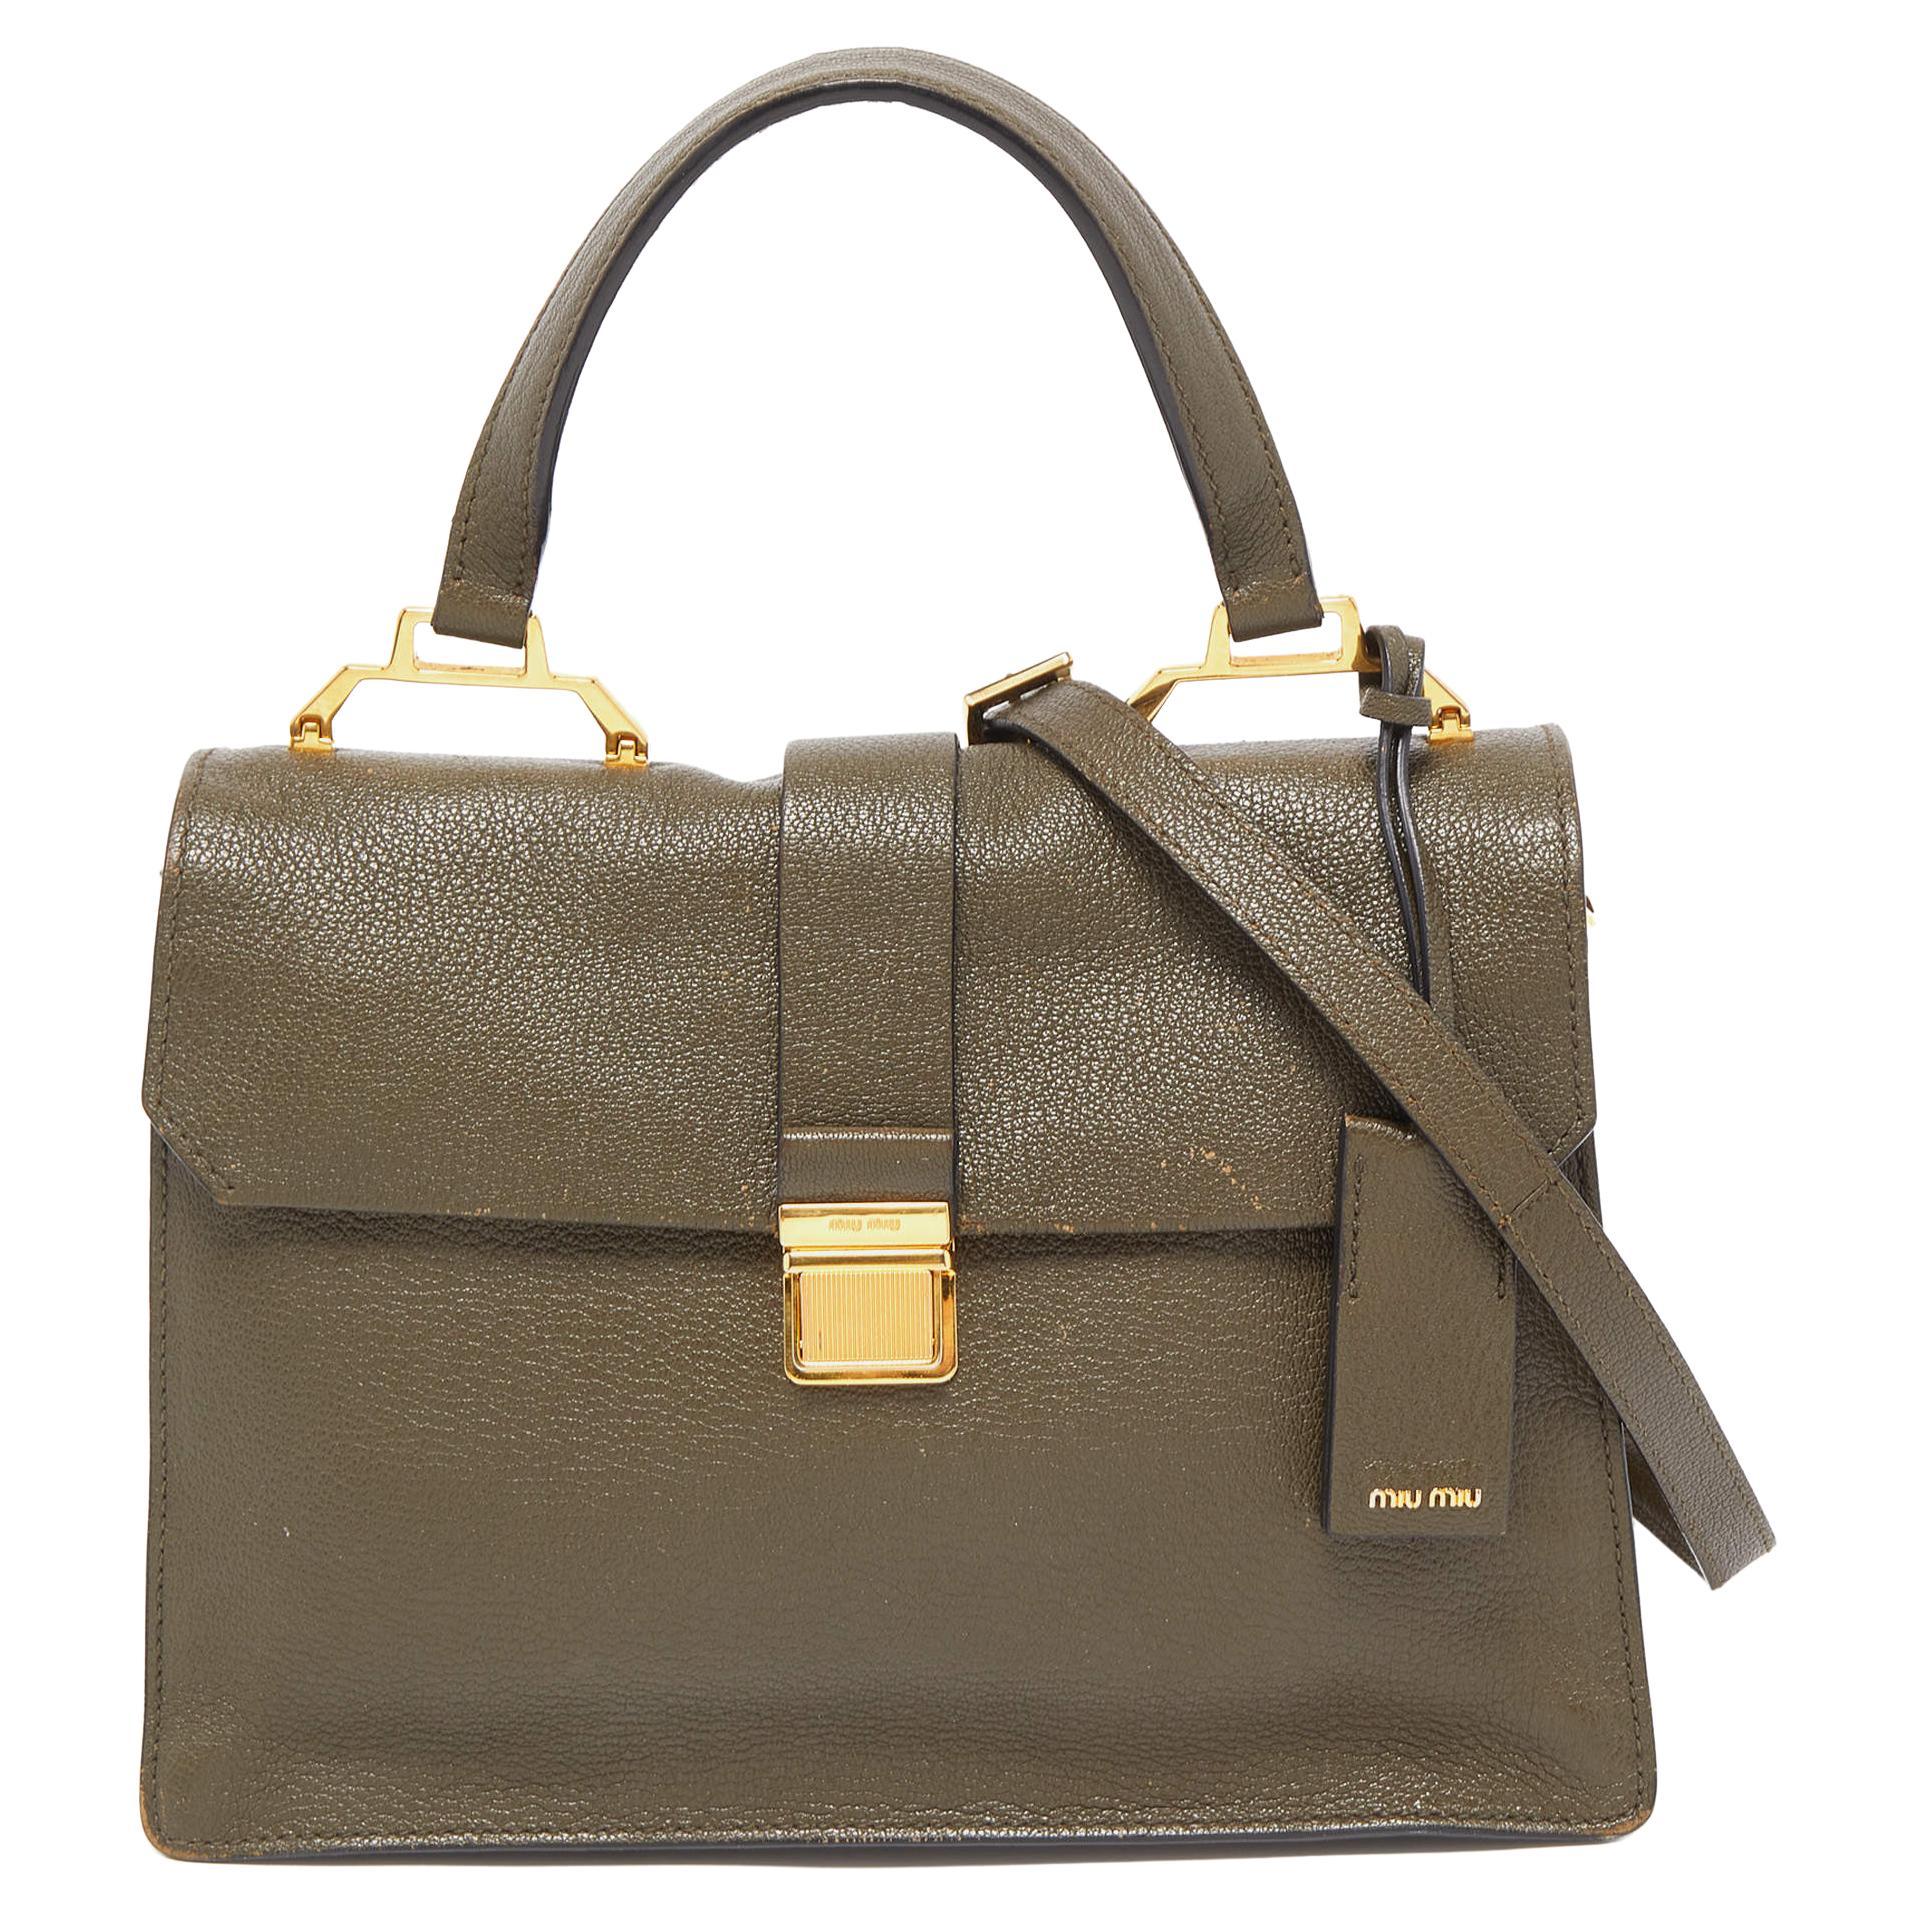 Textured Leather Grace Shoulder Bag with Side Zip Size unica